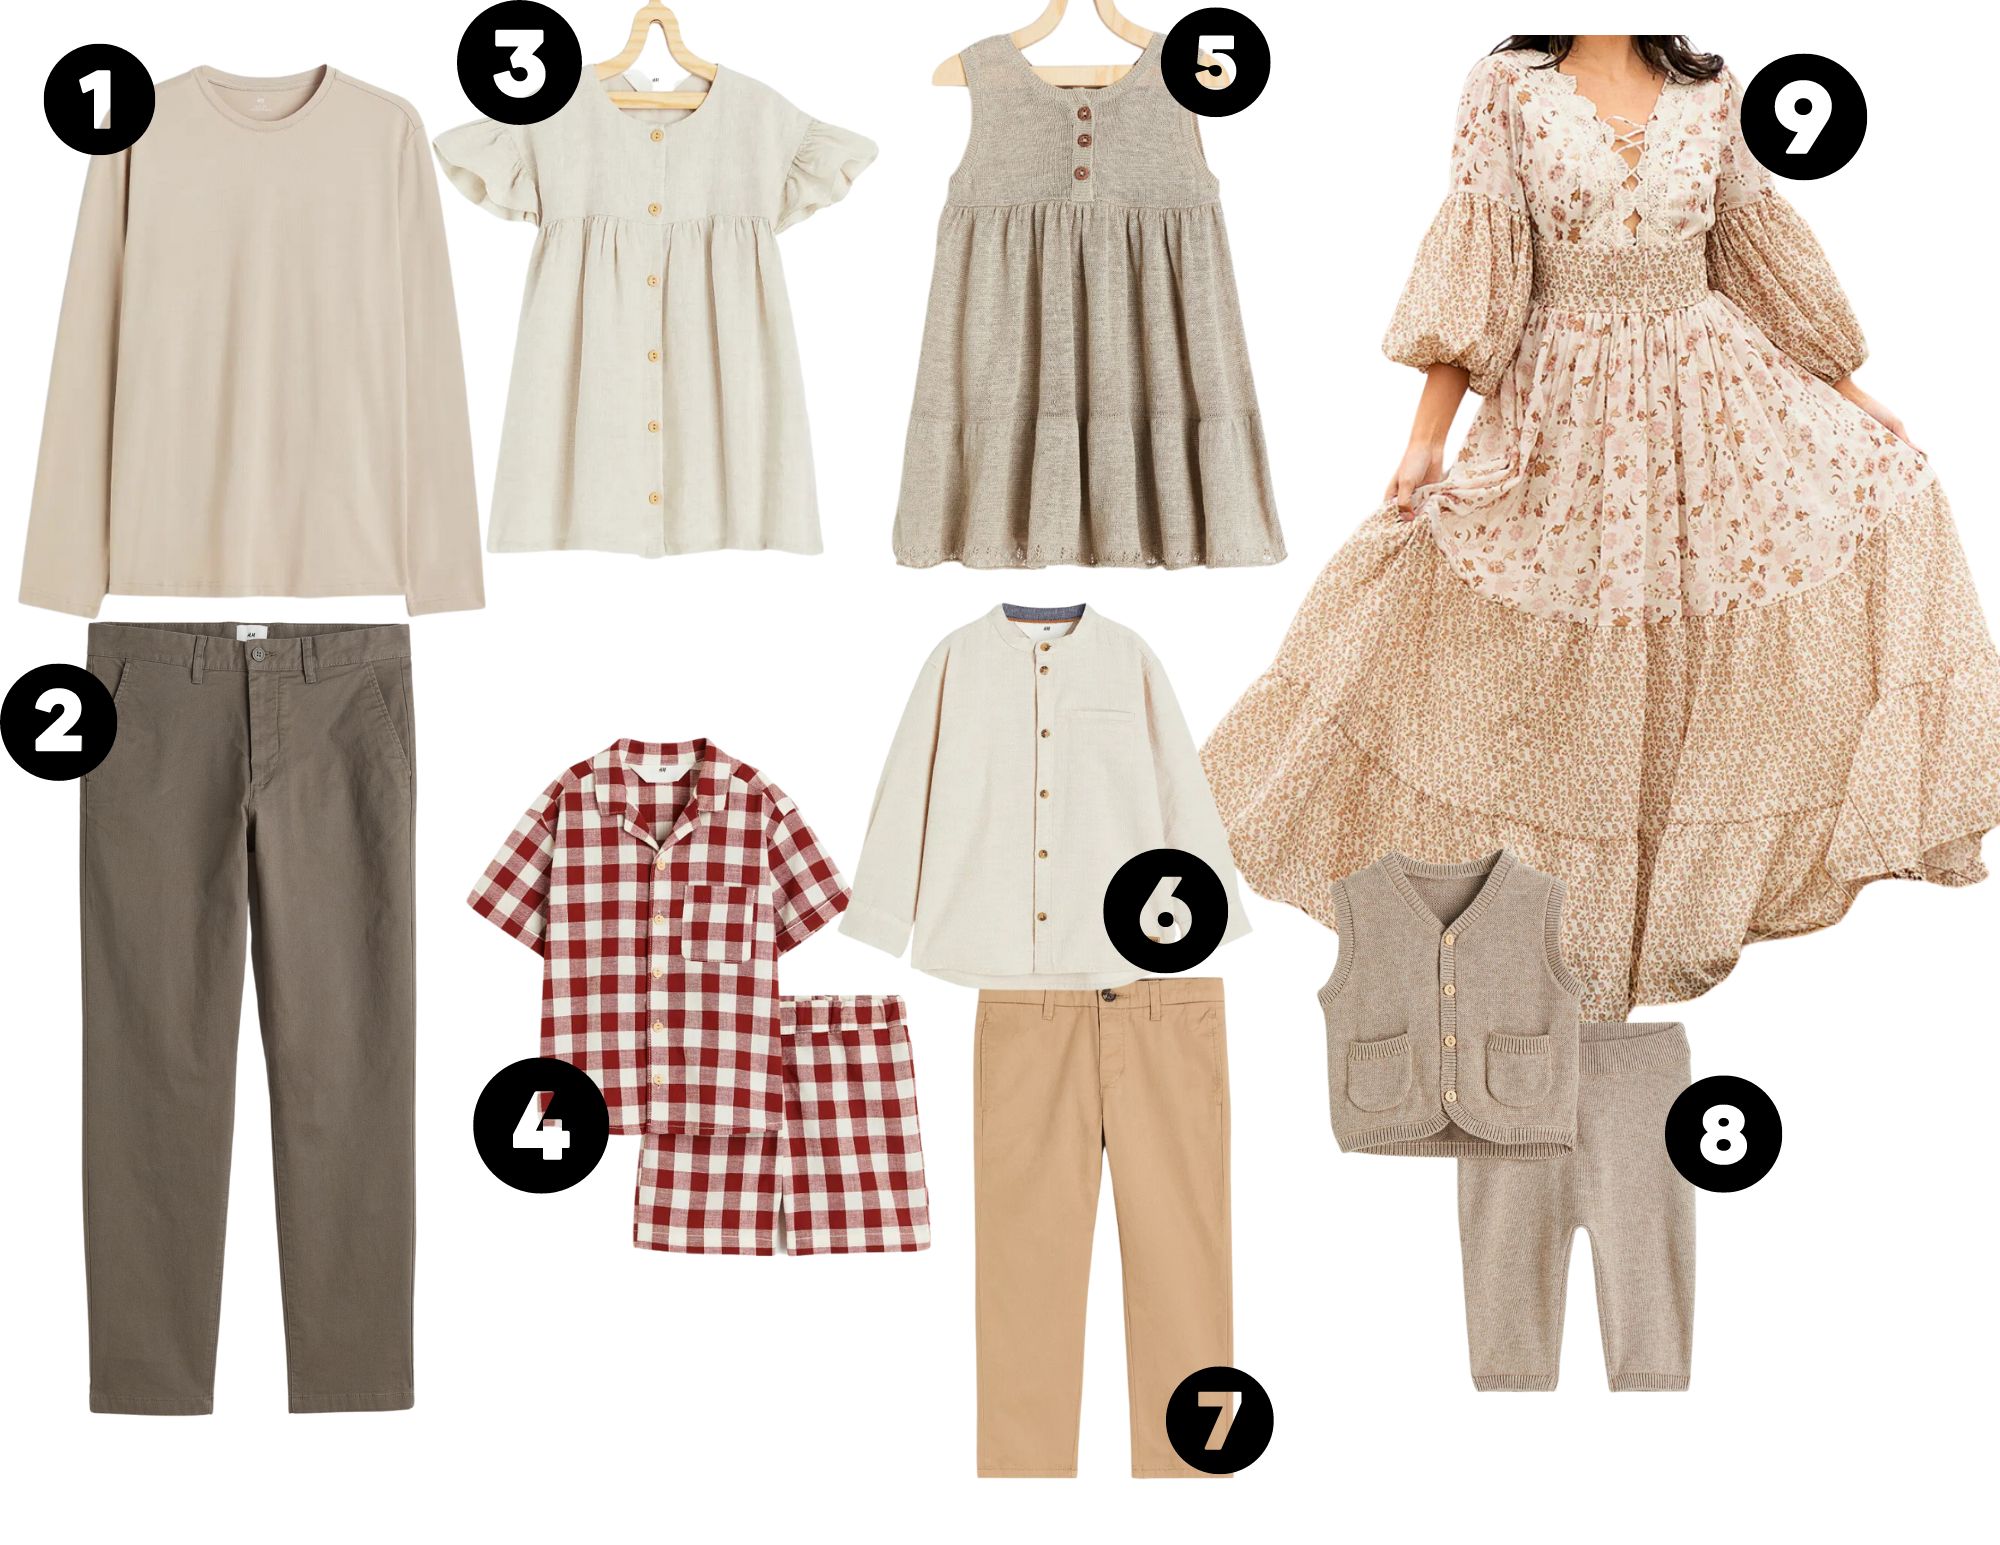 style guide, collage of images for what to wear for family photos